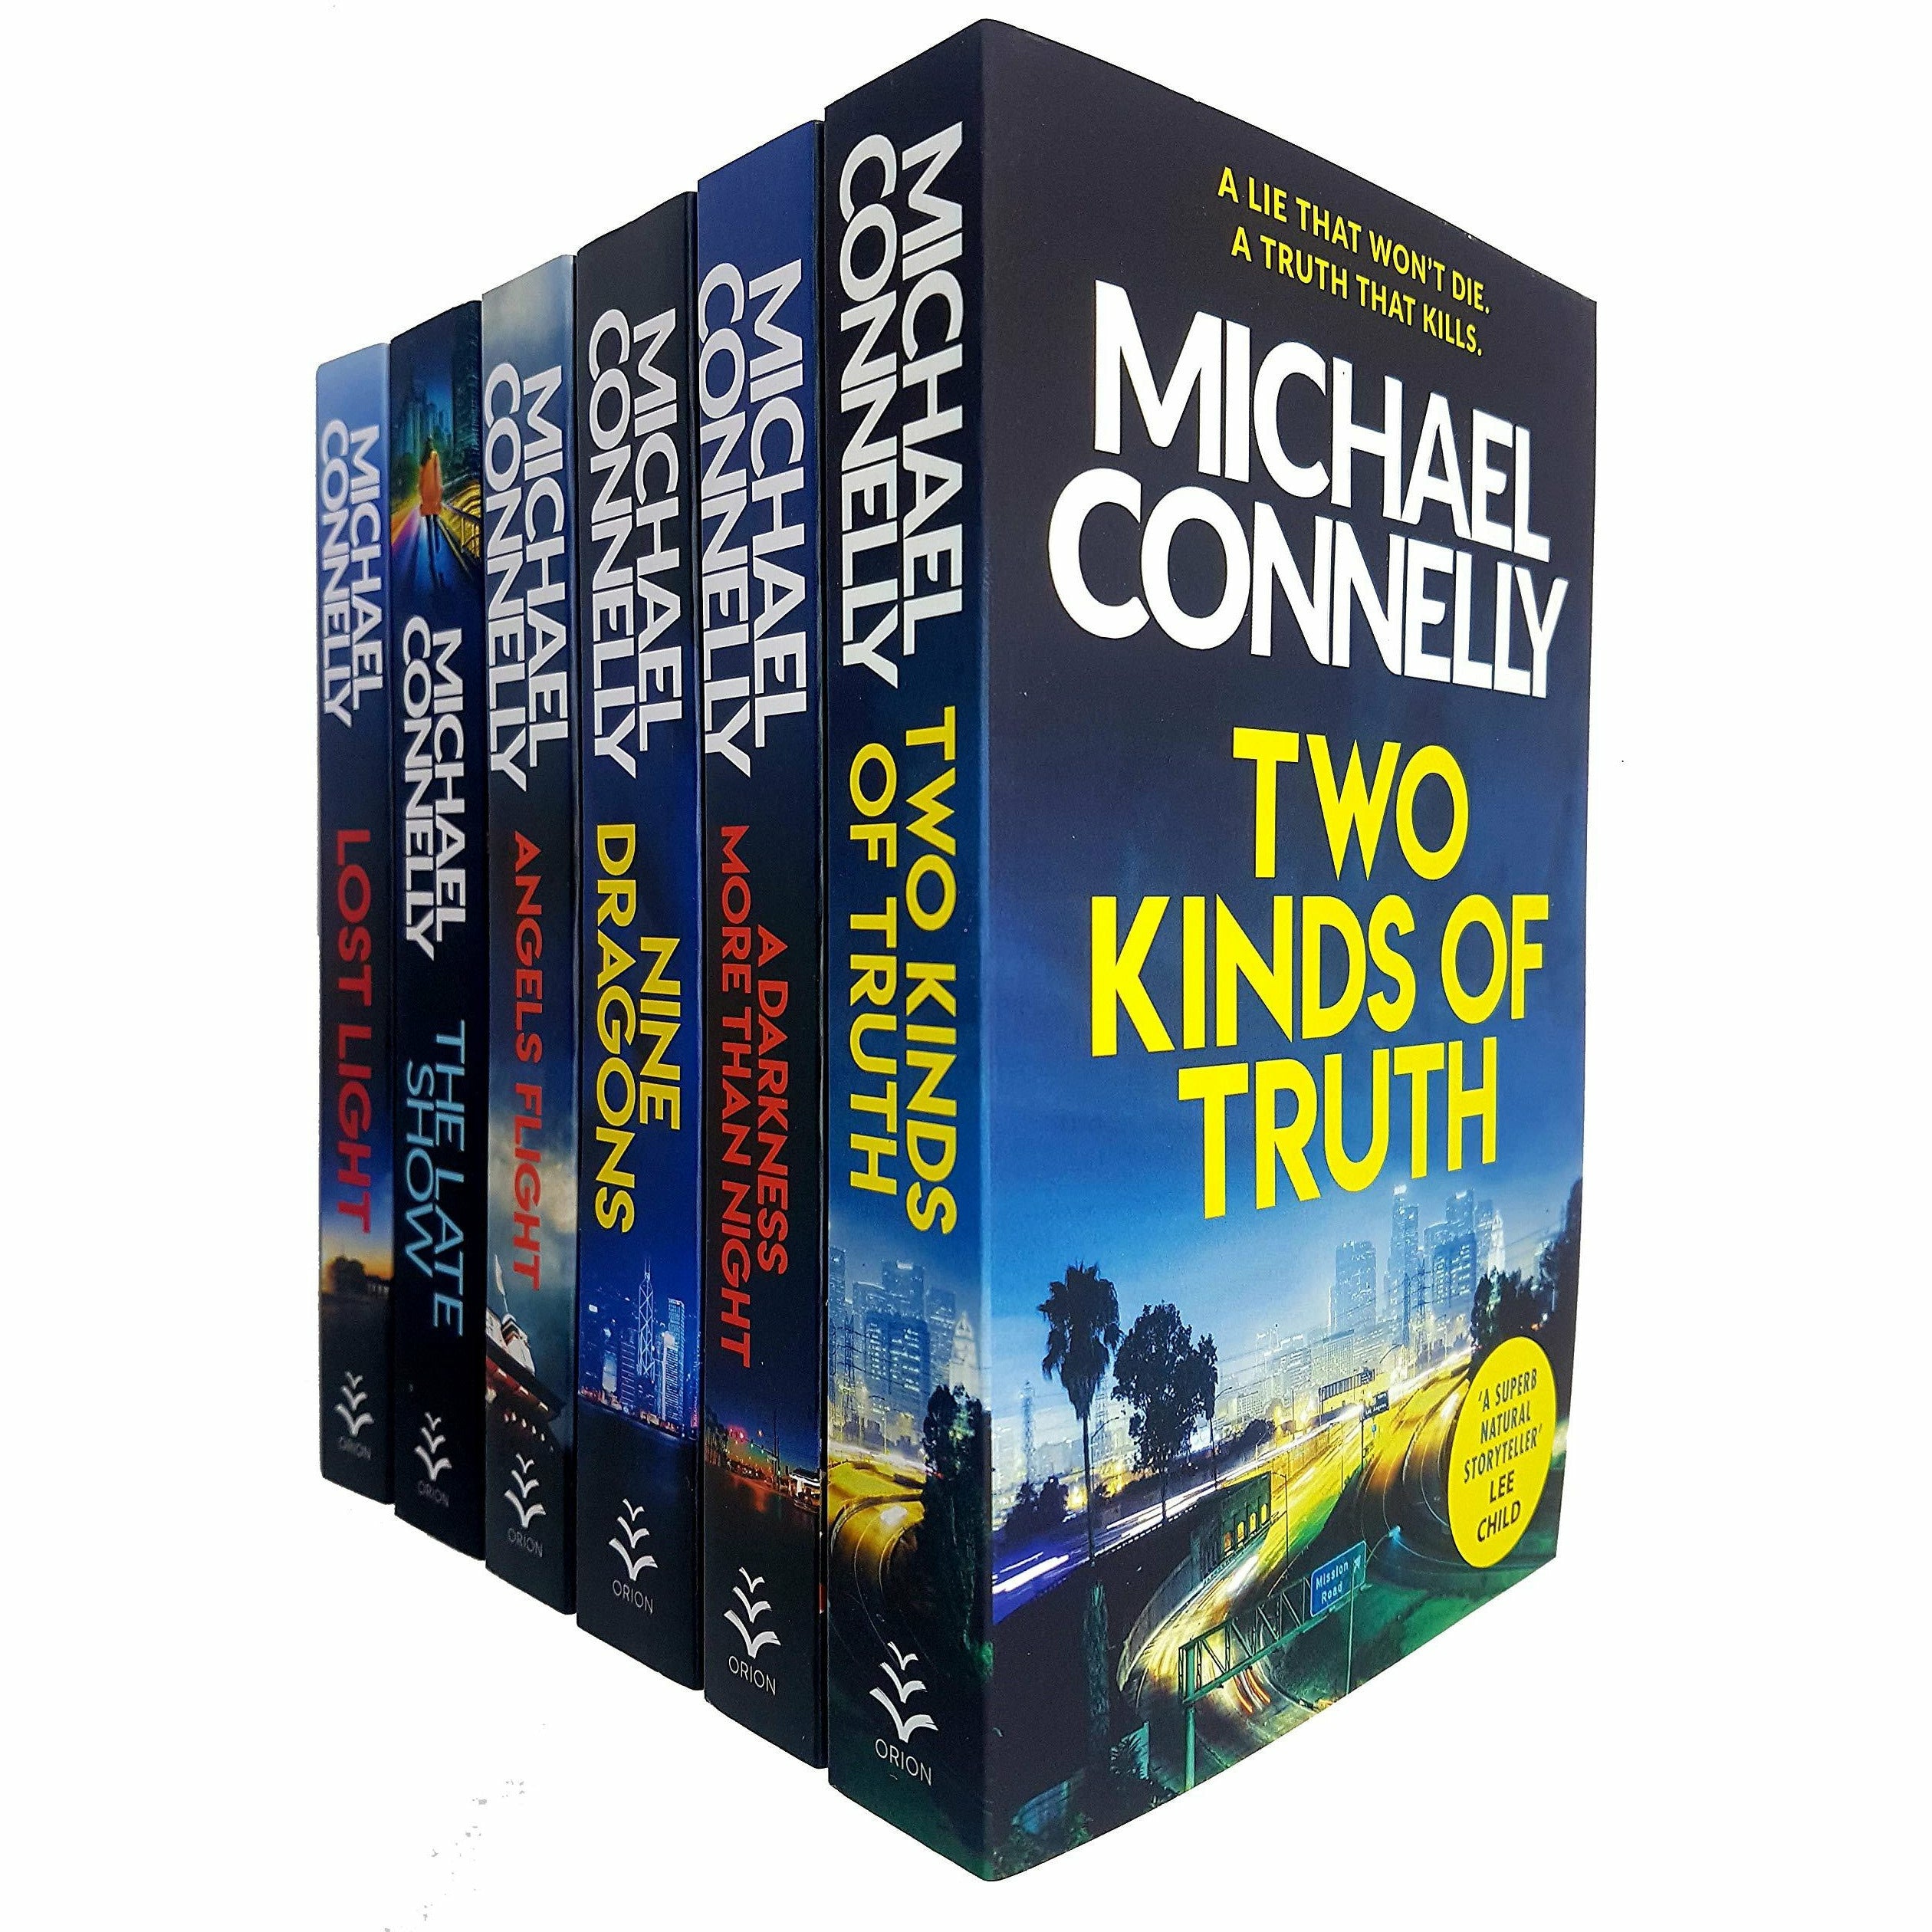 Harry　Books　Michael　Book　Connelly　Bosch　Bundle　Set　Series　Collection　The